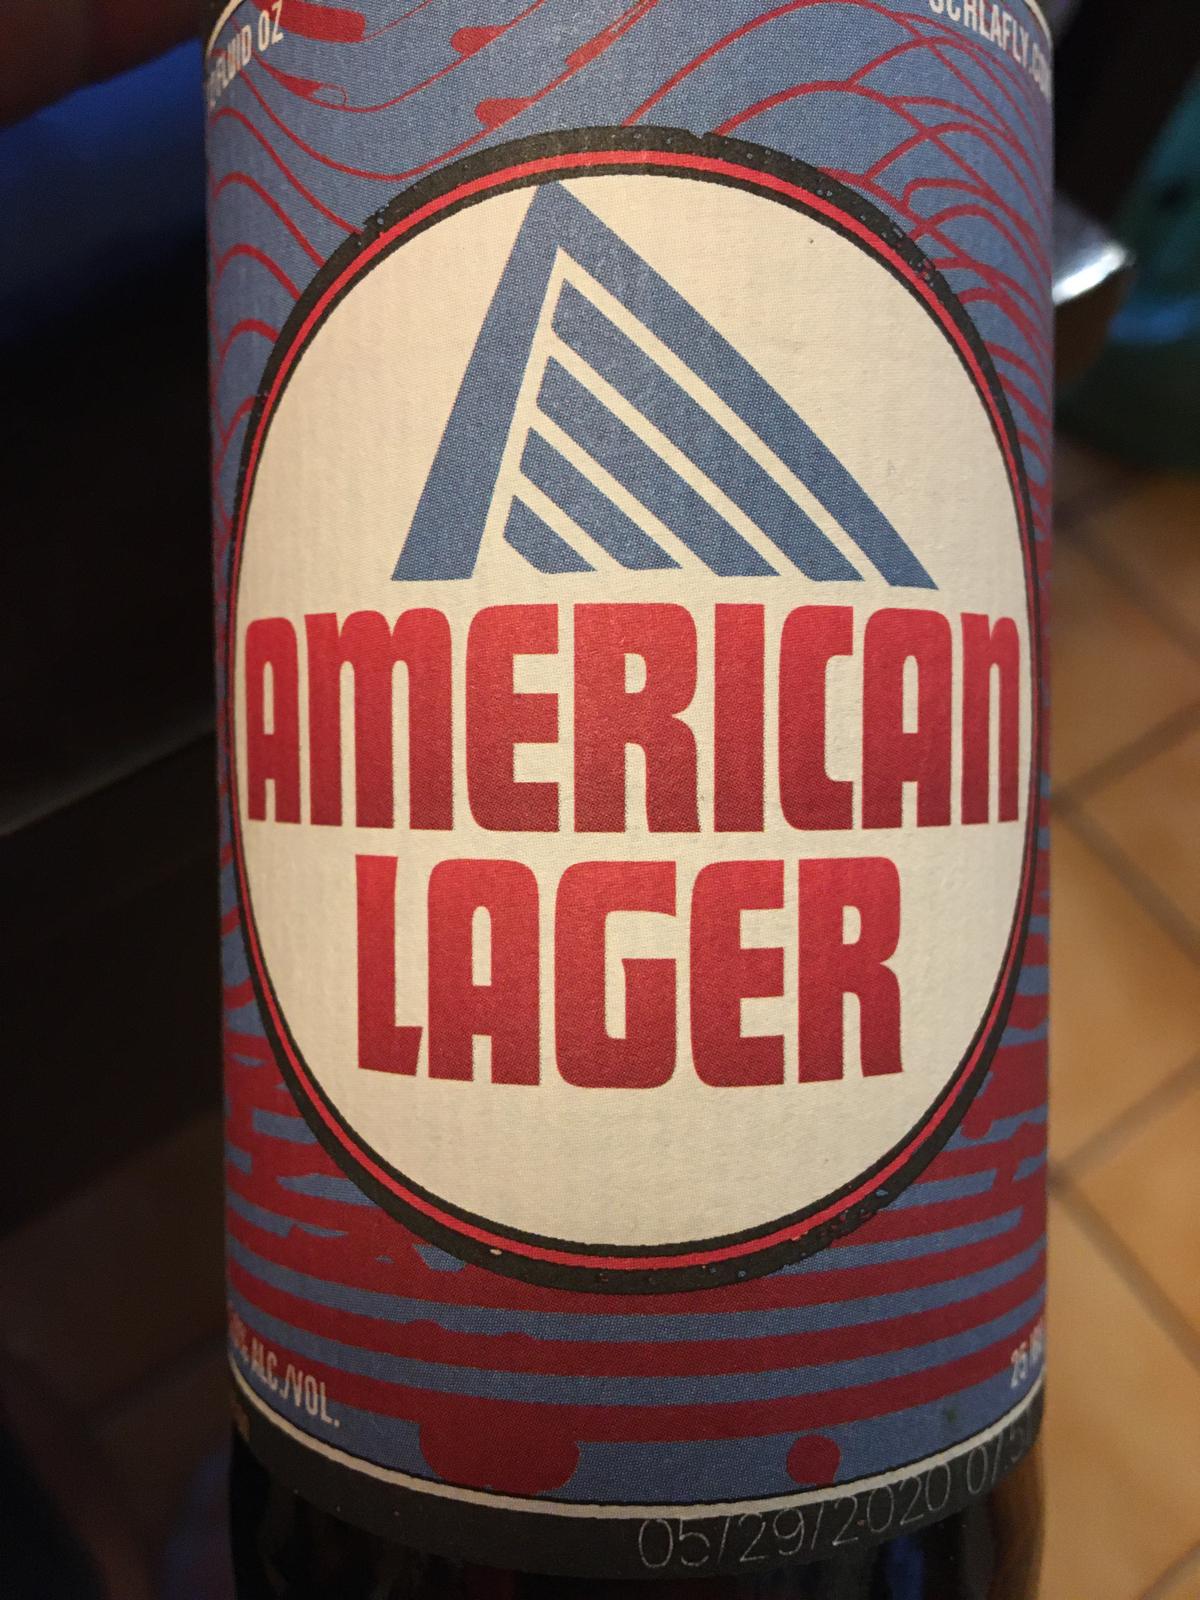 Schlafly American Lager